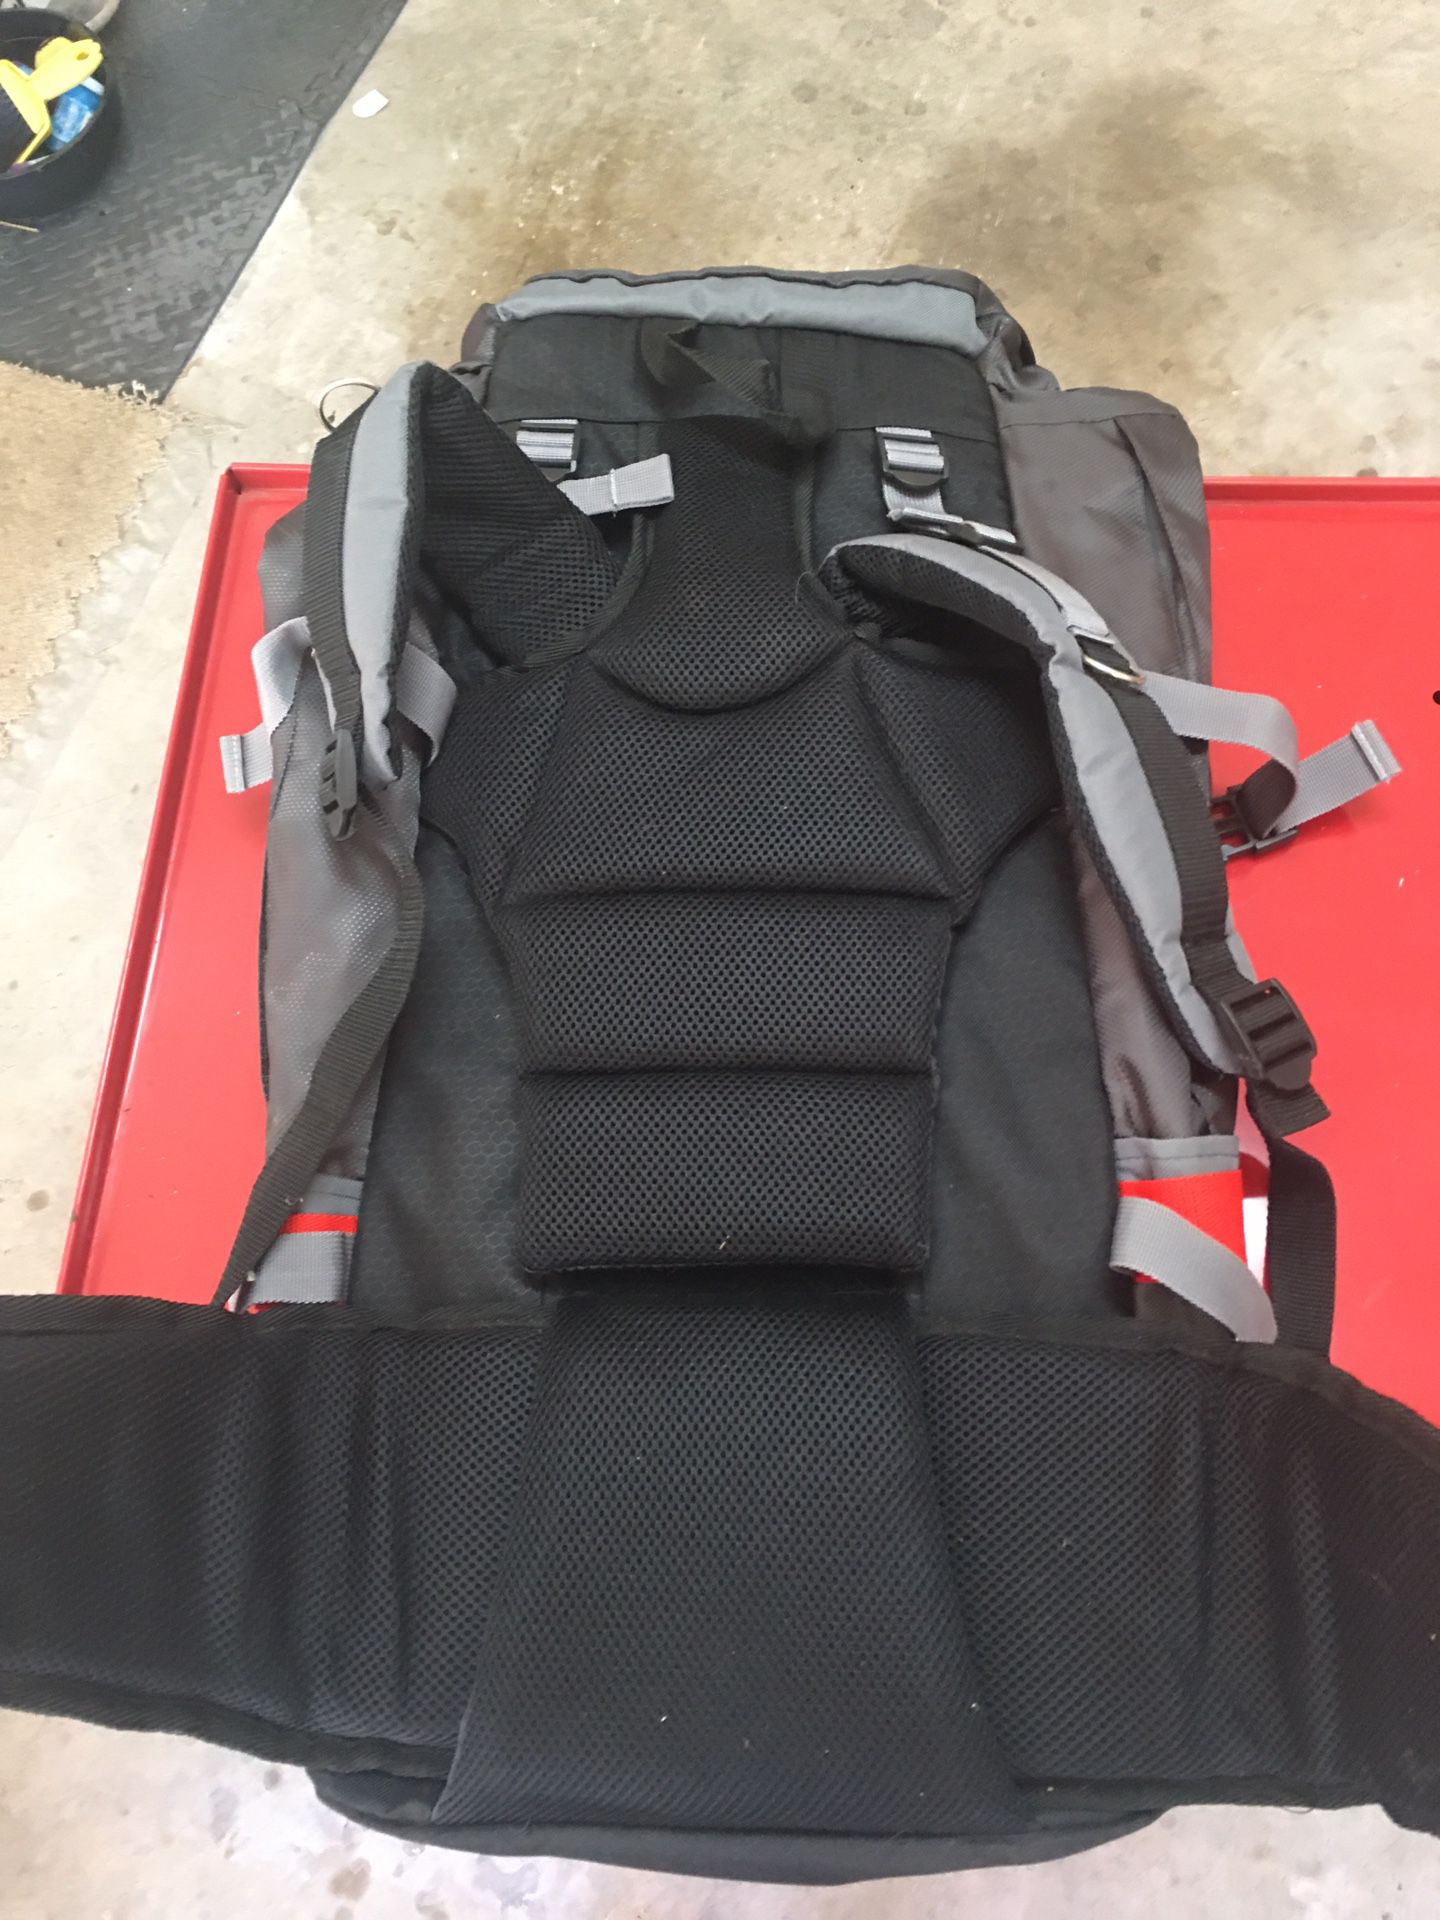 Stansport backpack. New never used